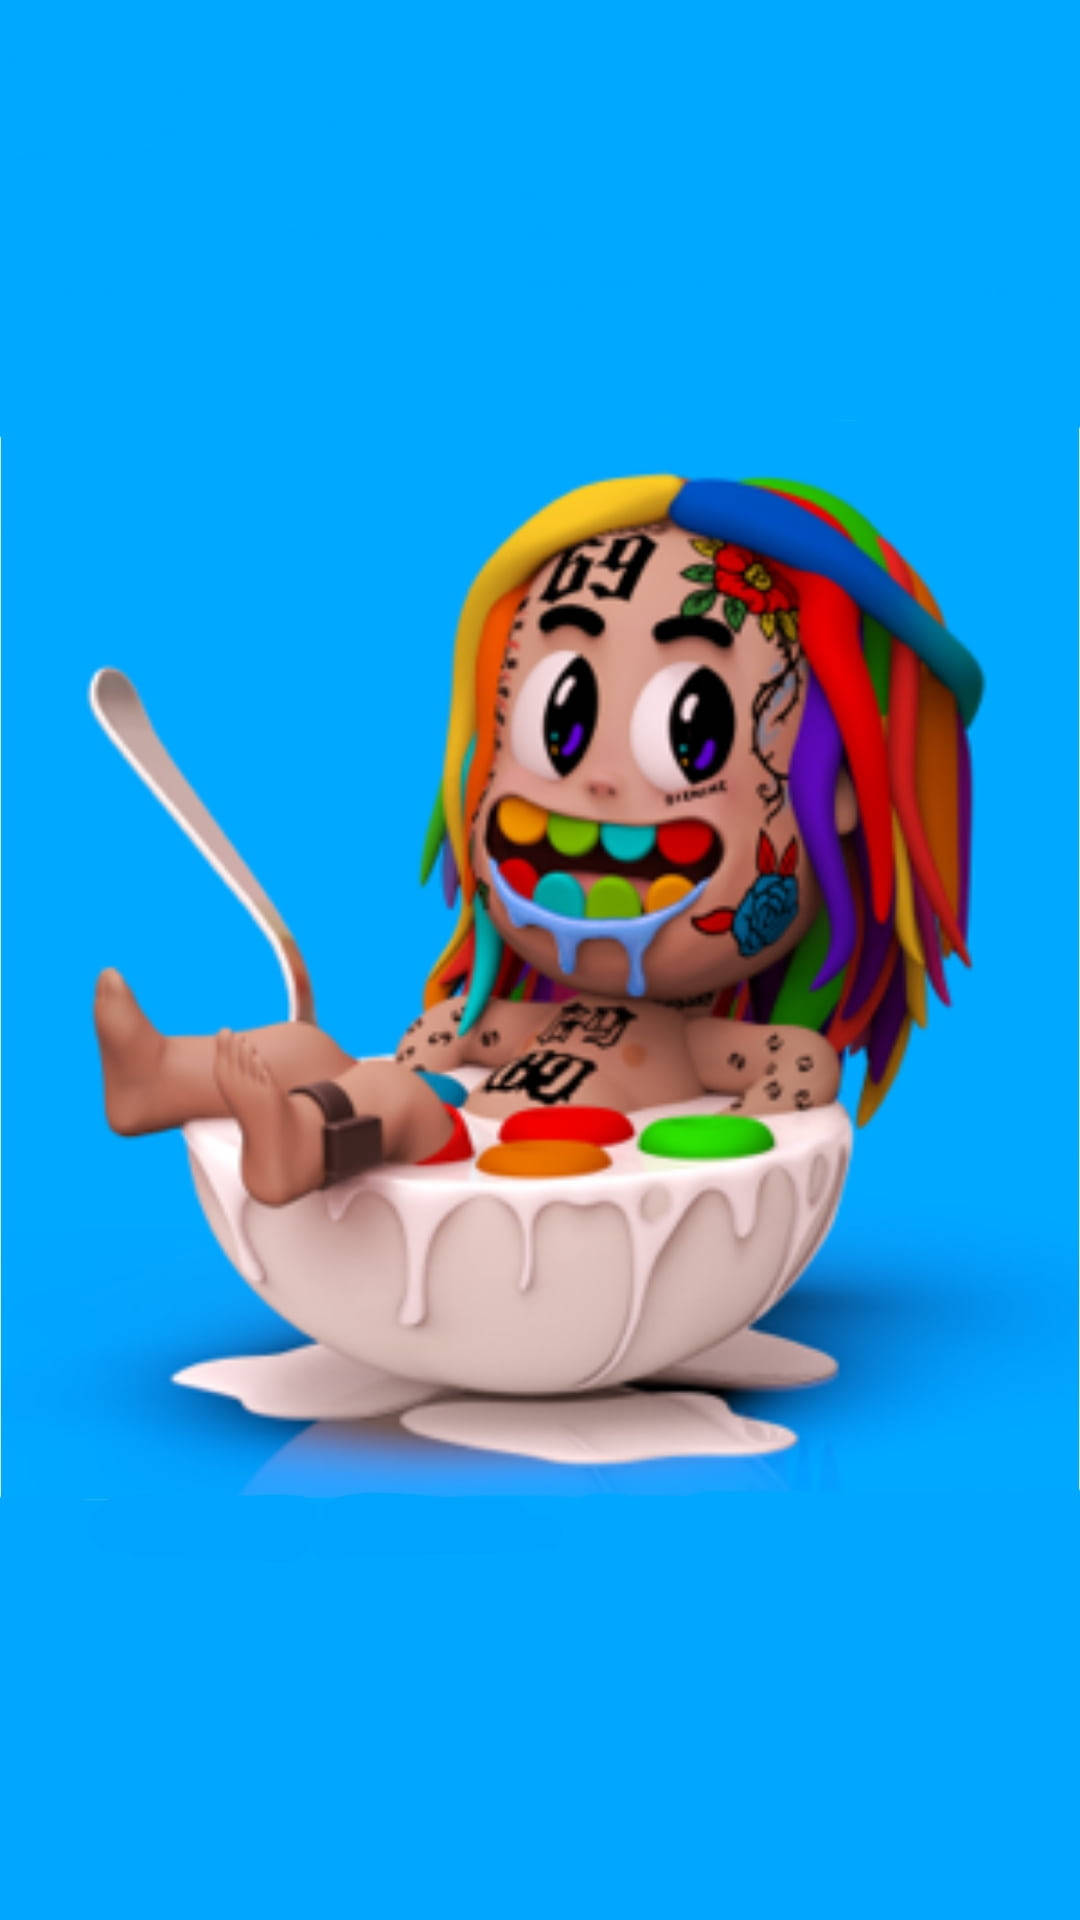 6ix9ine On A Bowl Of Cereal Art Background